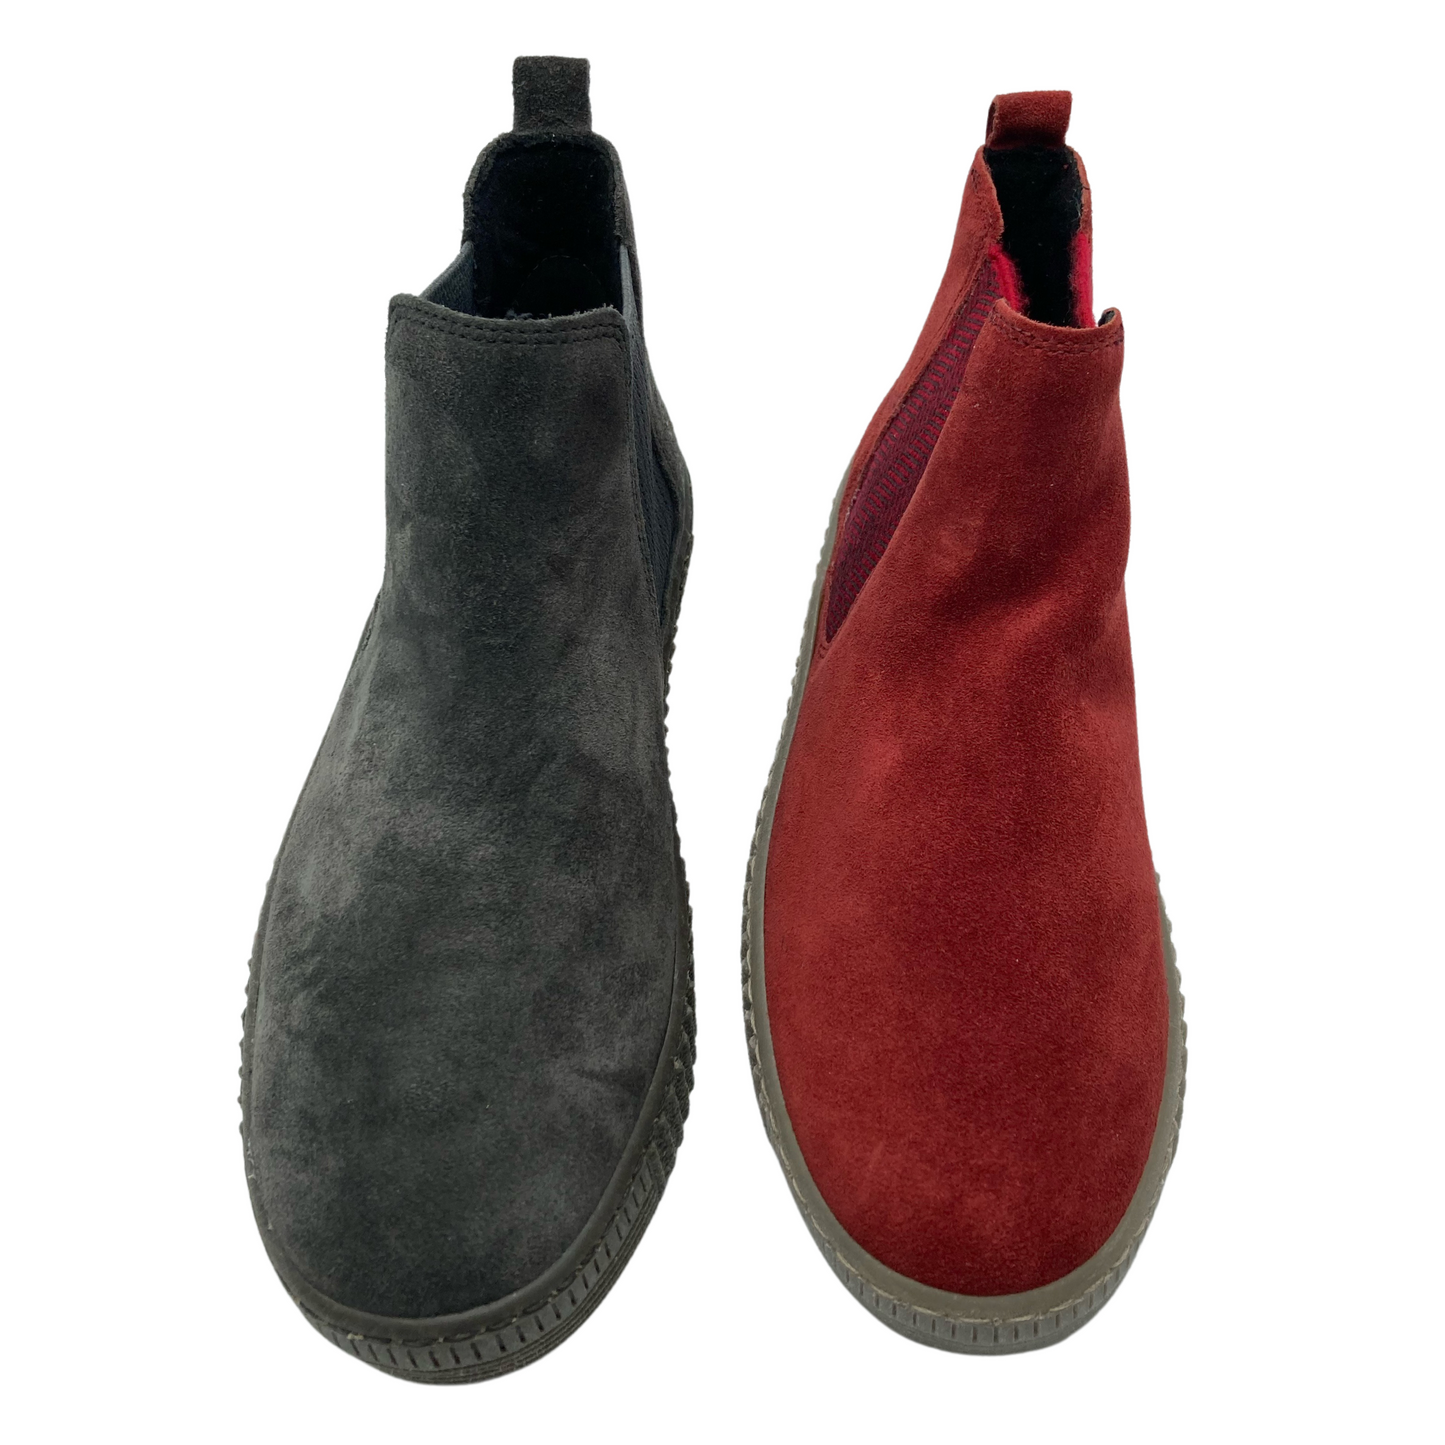 View of one grey bootie and one red bootie side by side both with rounded toe and elastic side gores